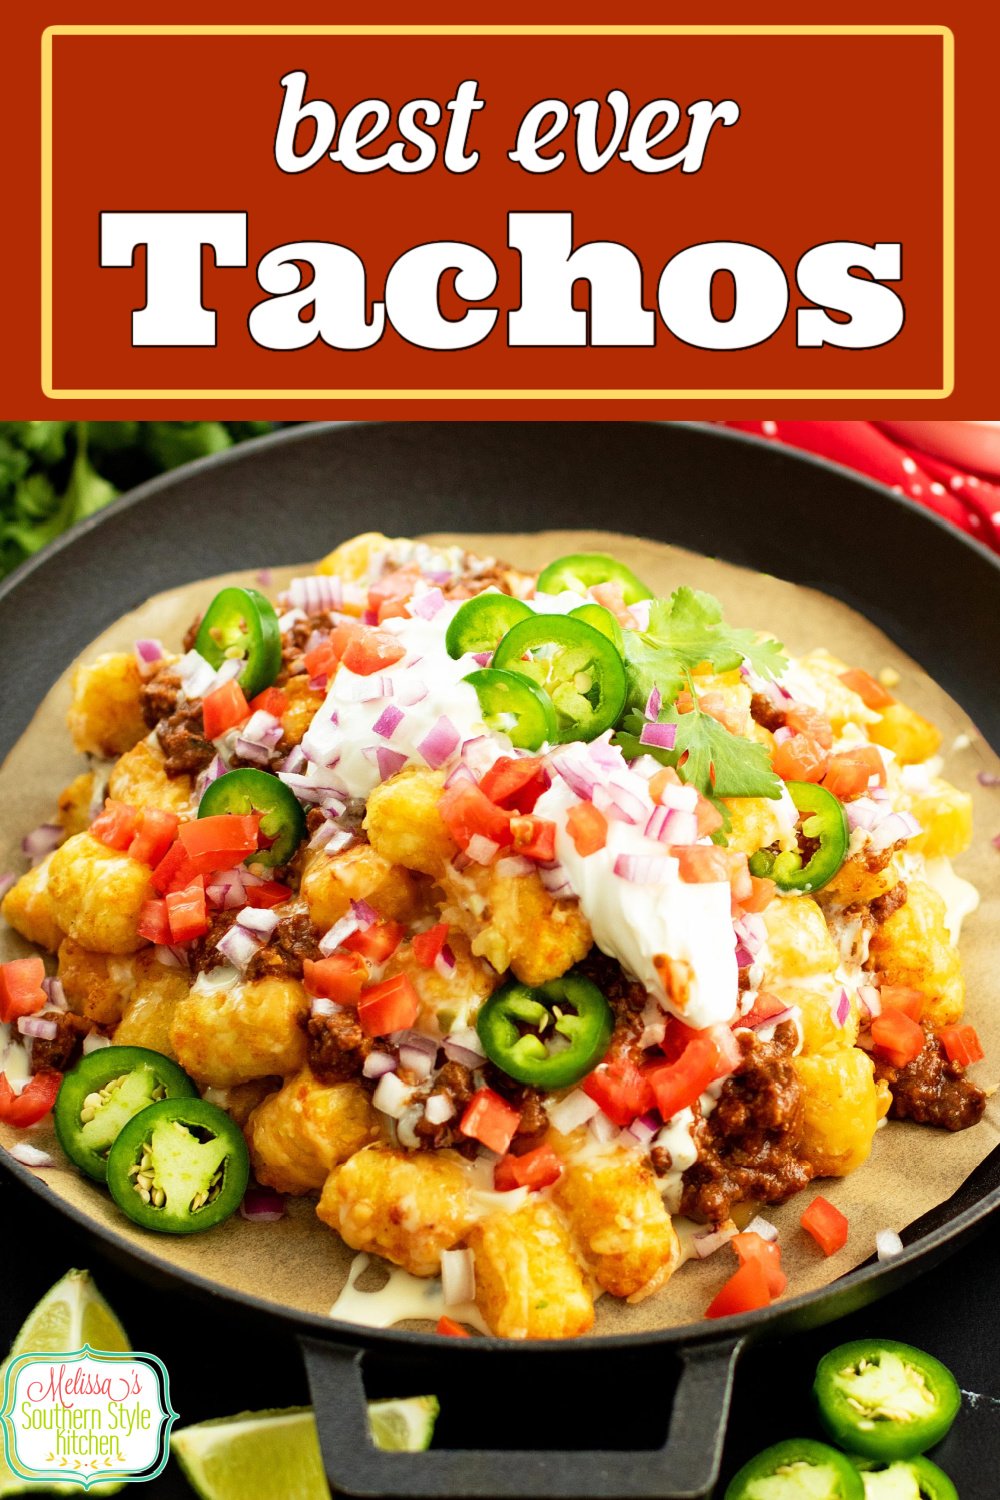 These loaded cheesy Tachos feature crispy baked tater tots loaded with the best nacho toppings #tachos #tatertots #appetizerrecipes #easytotchos #potatorecipes #tatertotrecipes #easygroundbeefrecipes via @melissasssk